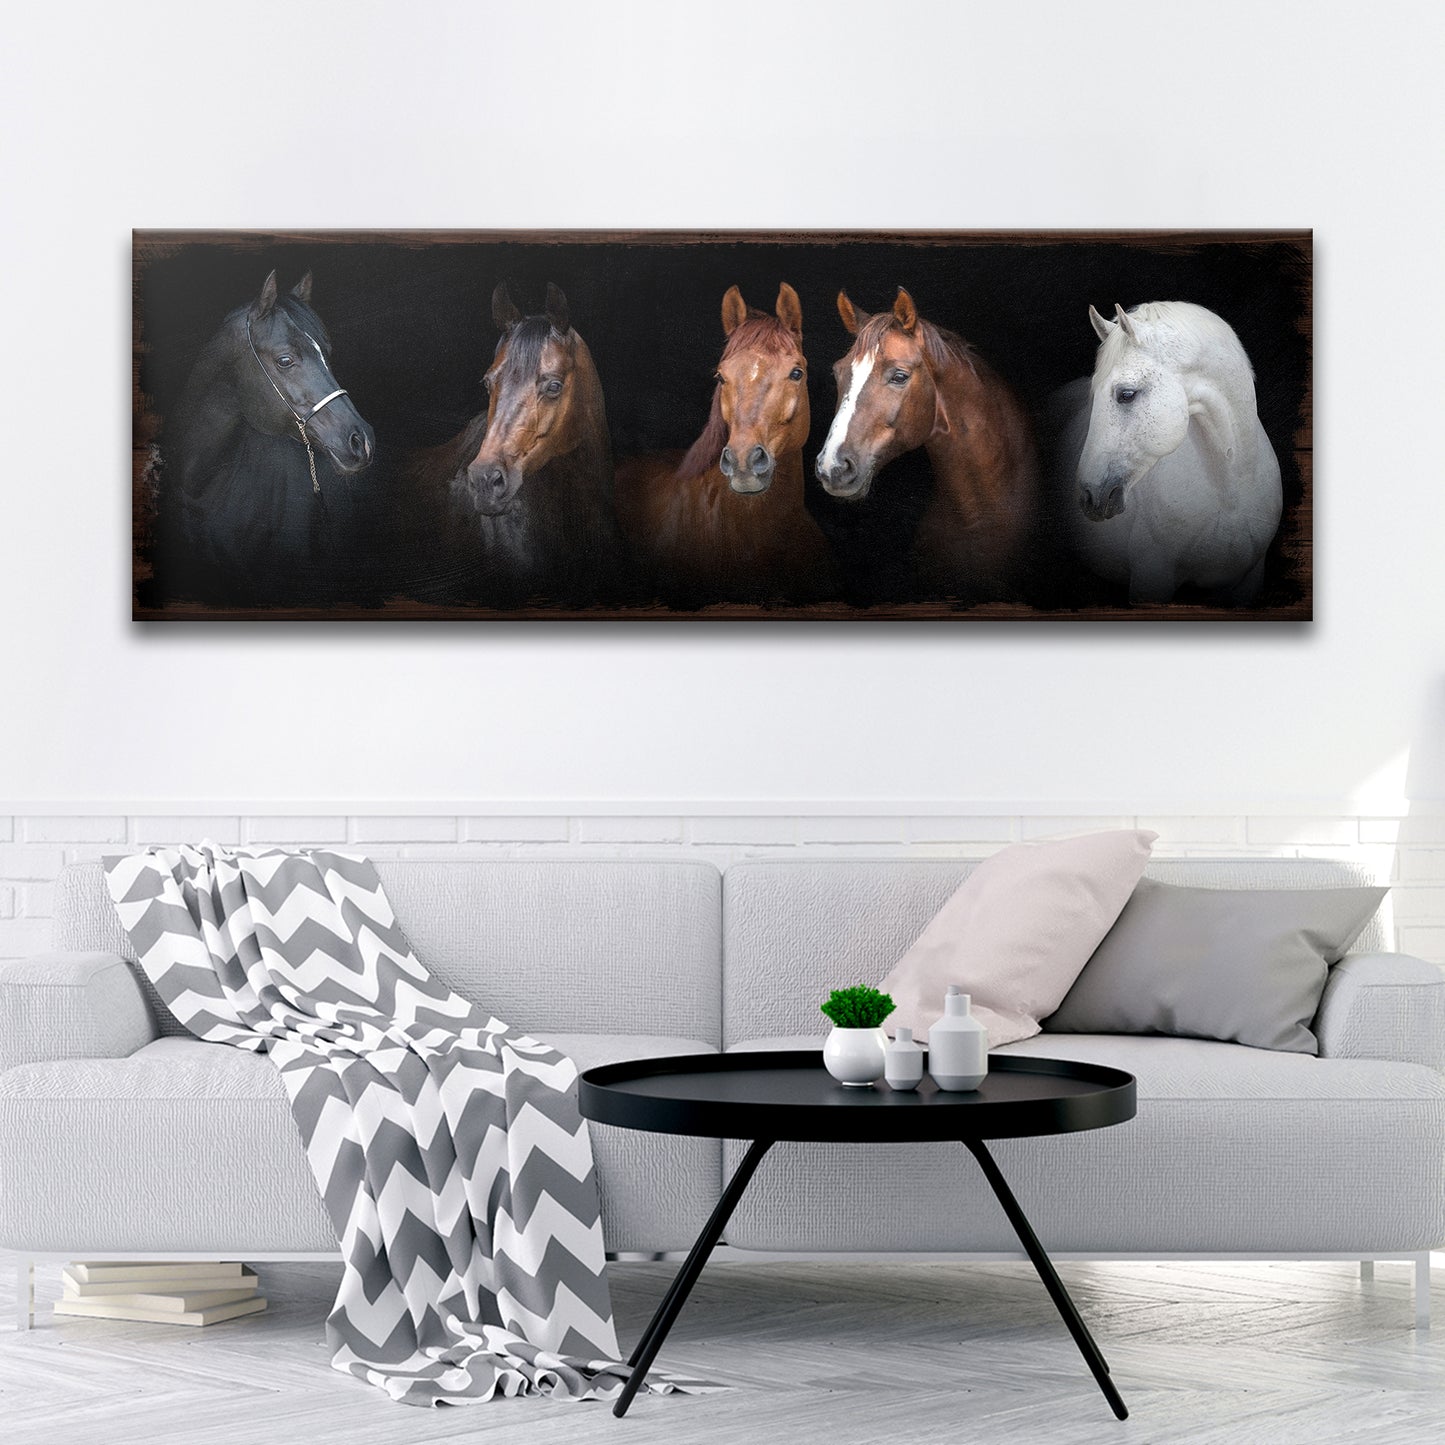 A Family of Horses Style 1 - Image by Tailored Canvases